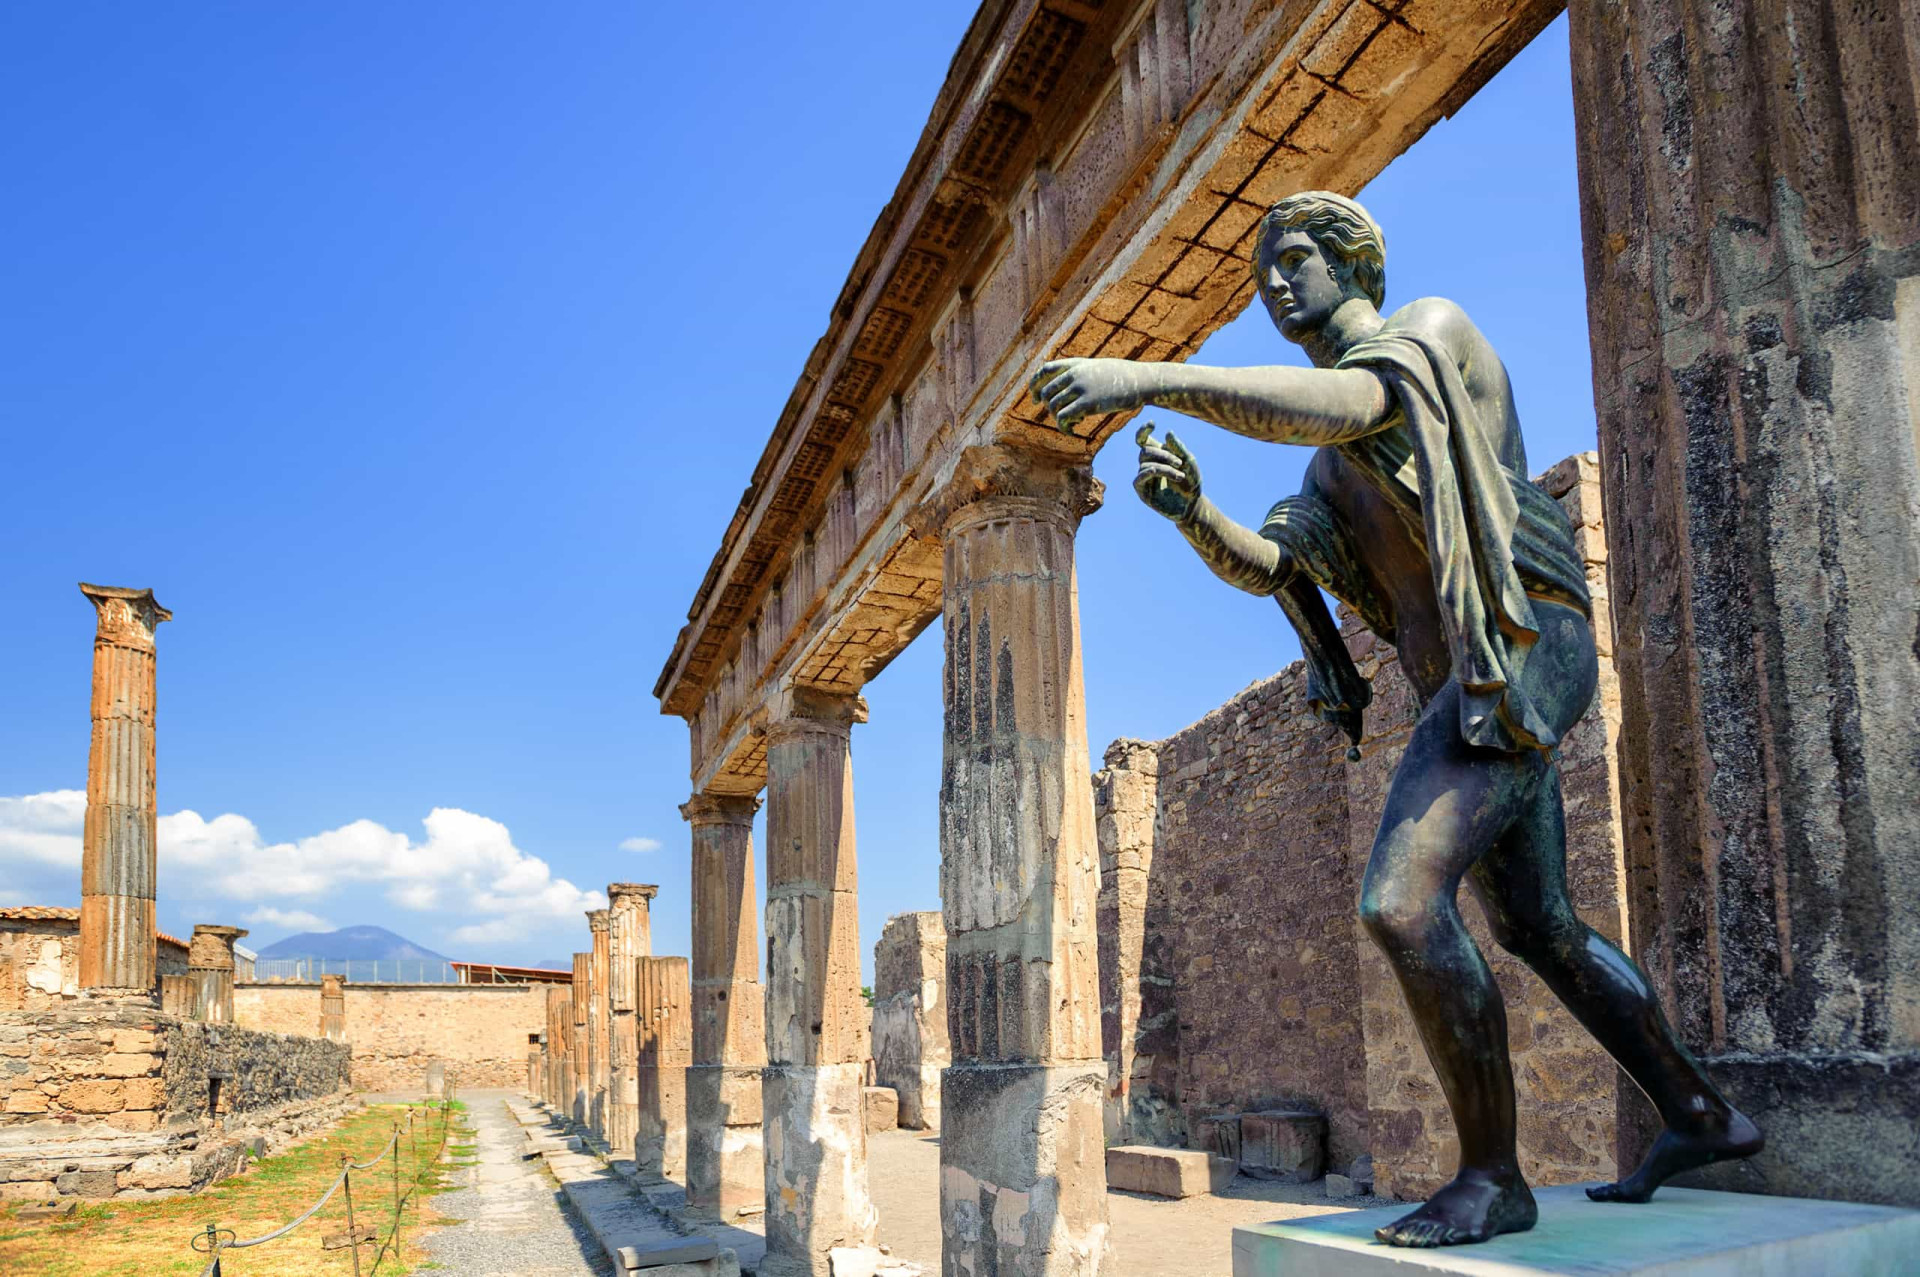 Pompeii is a UNESCO World Heritage Site. The city receives over two and a half million visitors each year.<p><a href="https://www.msn.com/en-us/community/channel/vid-7xx8mnucu55yw63we9va2gwr7uihbxwc68fxqp25x6tg4ftibpra?cvid=94631541bc0f4f89bfd59158d696ad7e">Follow us and access great exclusive content every day</a></p>